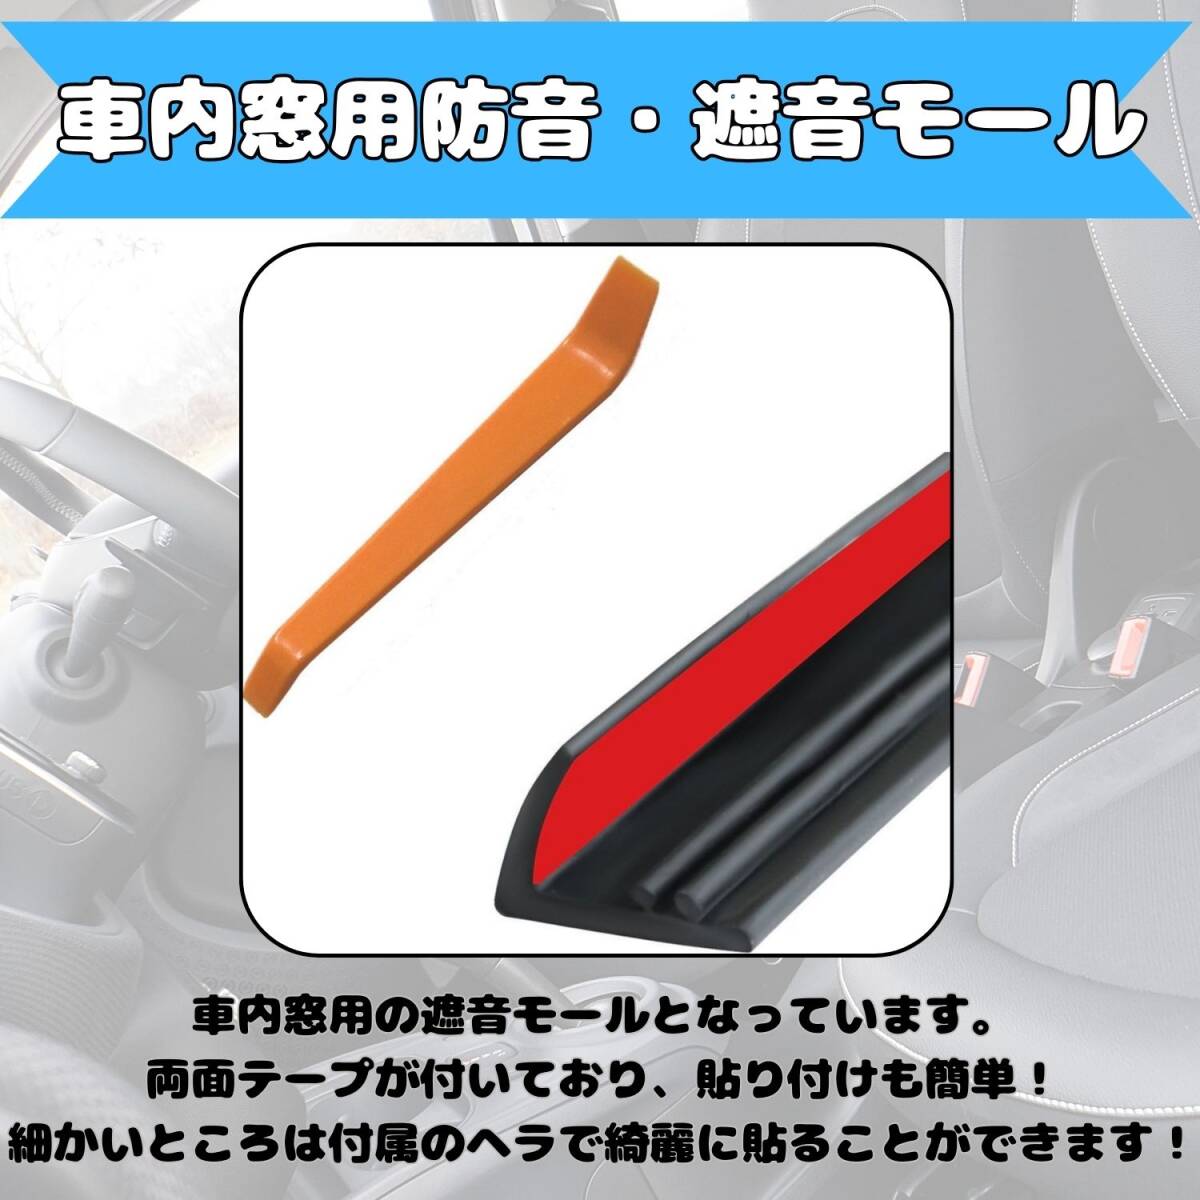  door molding manner cut . sound prevention quiet sound tape car window seal strip soundproofing crevice rubber ... reduction weather waterproof . manner all-purpose 4m